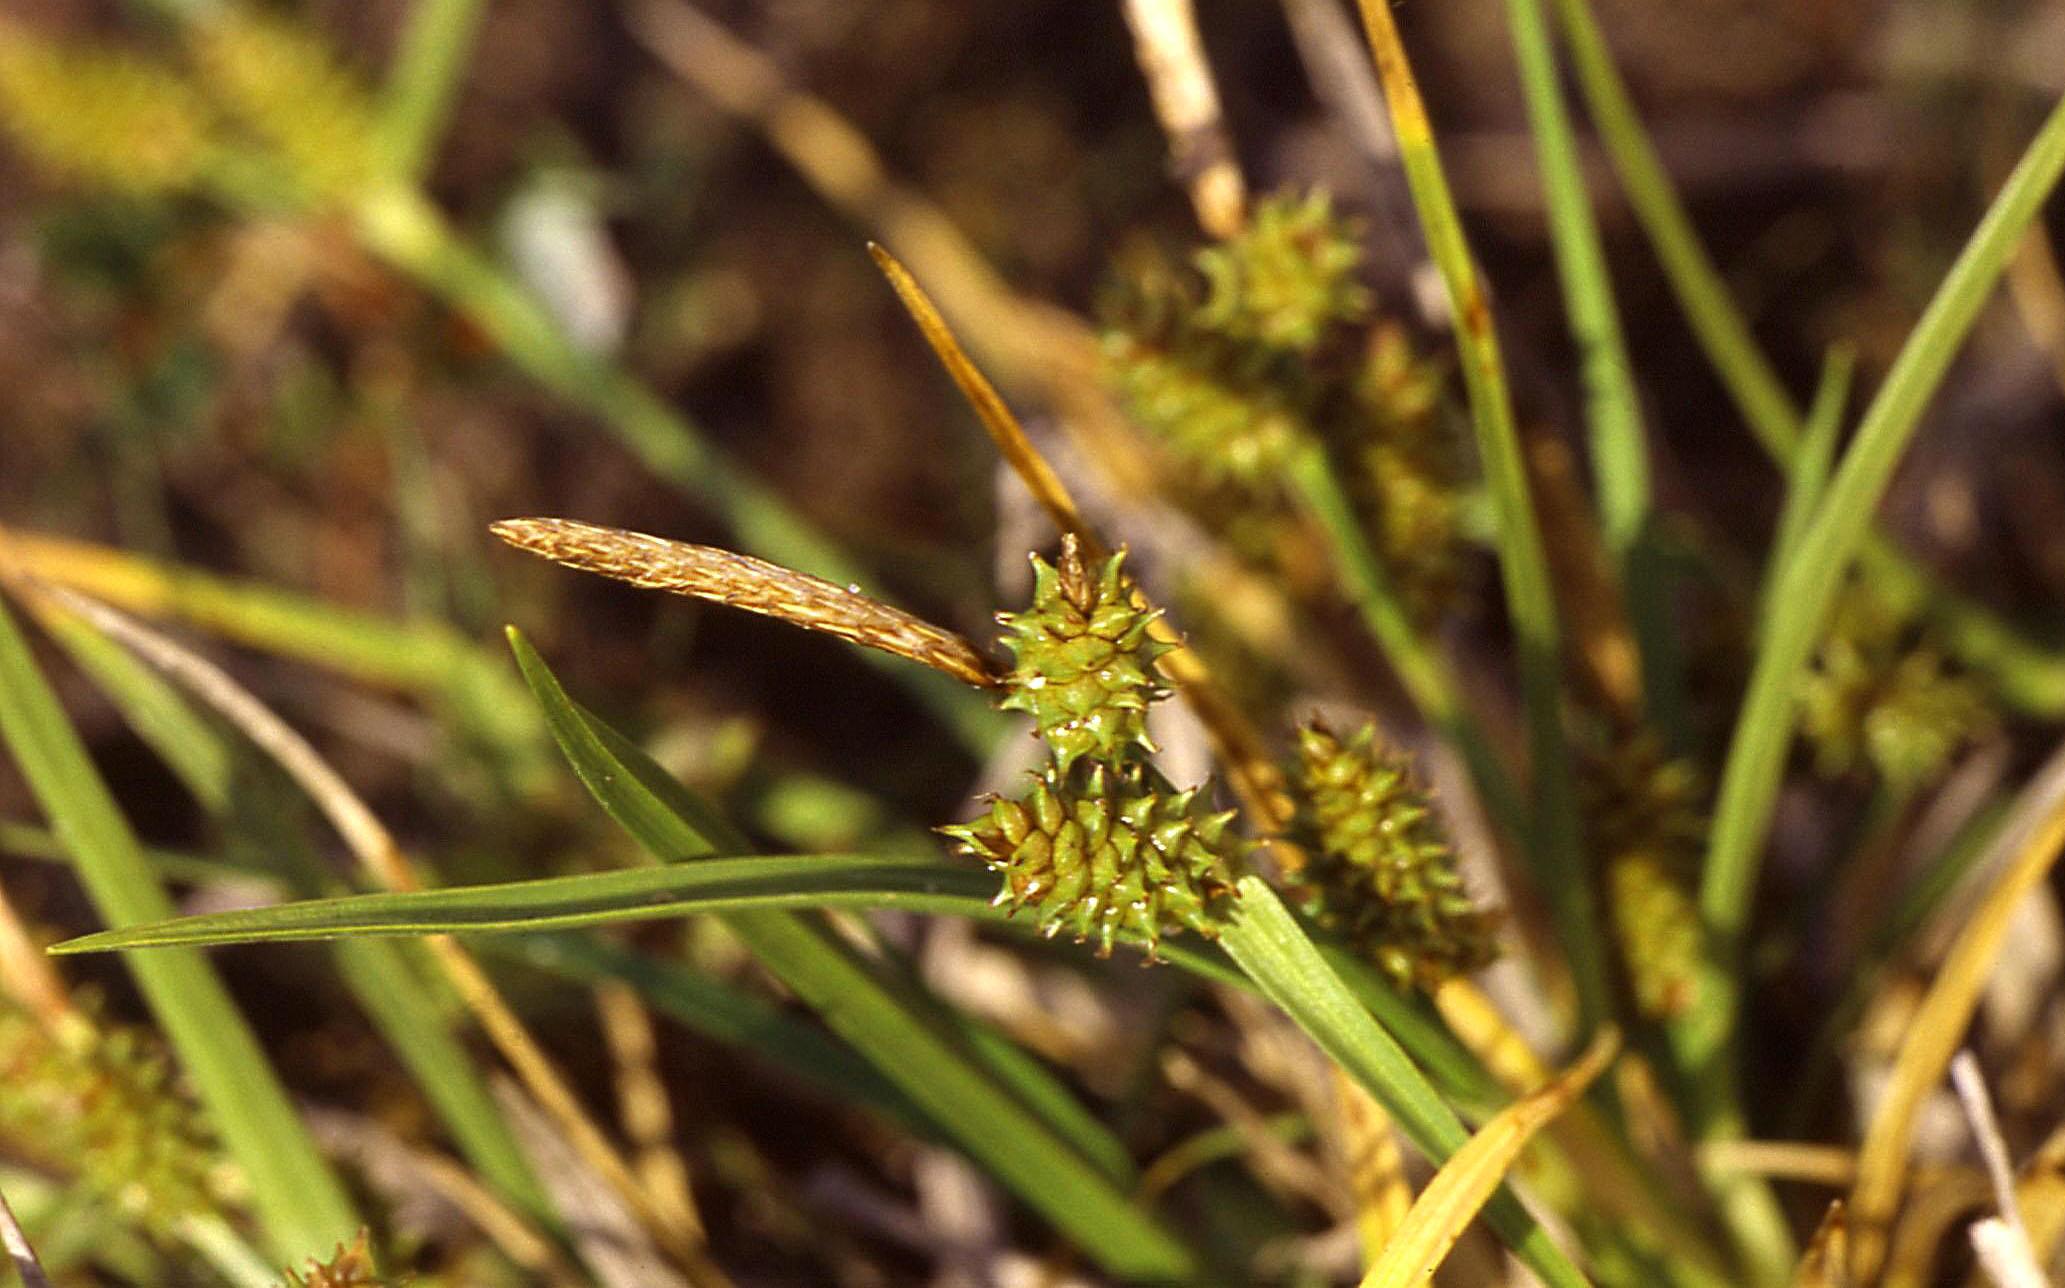 lime-brown spikelets with yellow-green foliage and stems